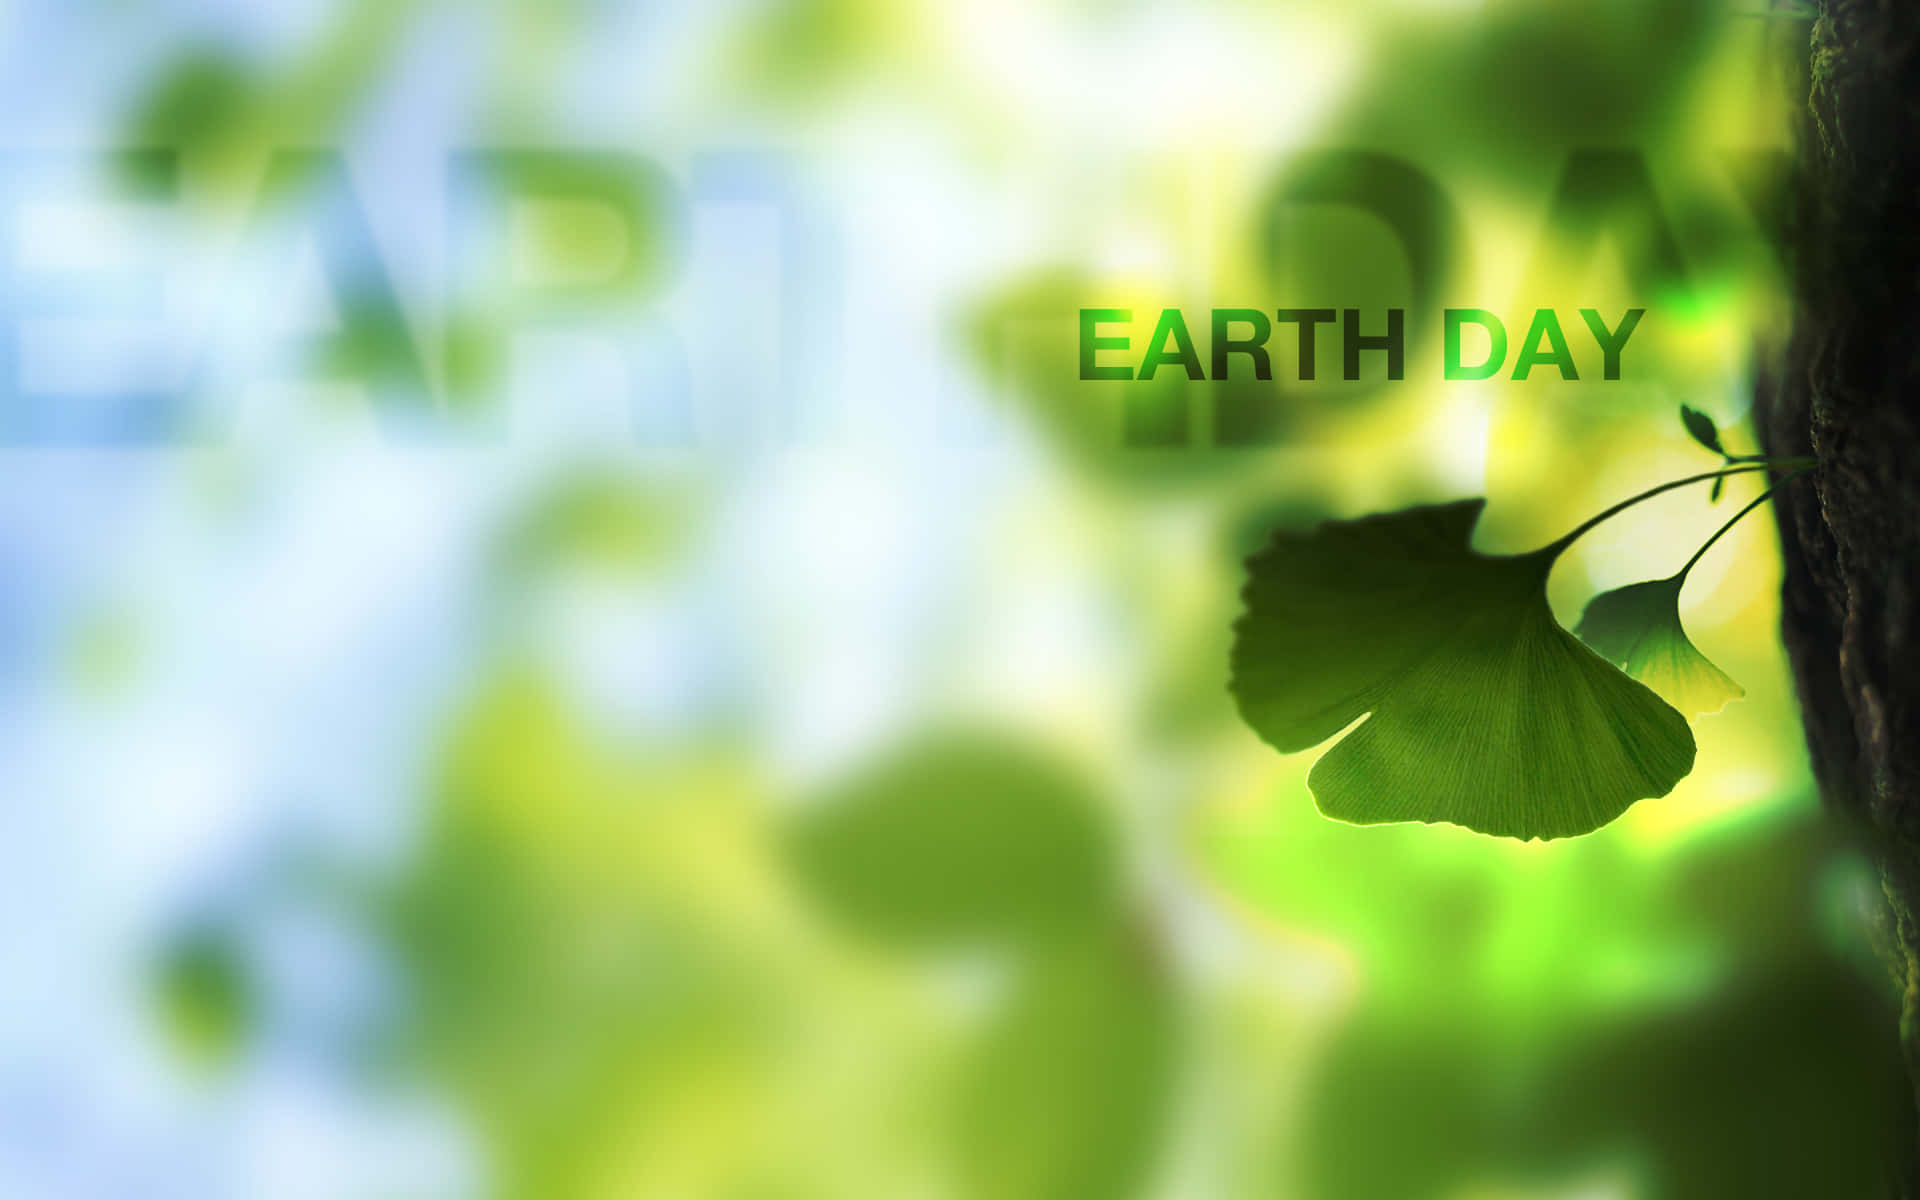 Celebrate each day like Earth Day; love, respect and protect our planet.